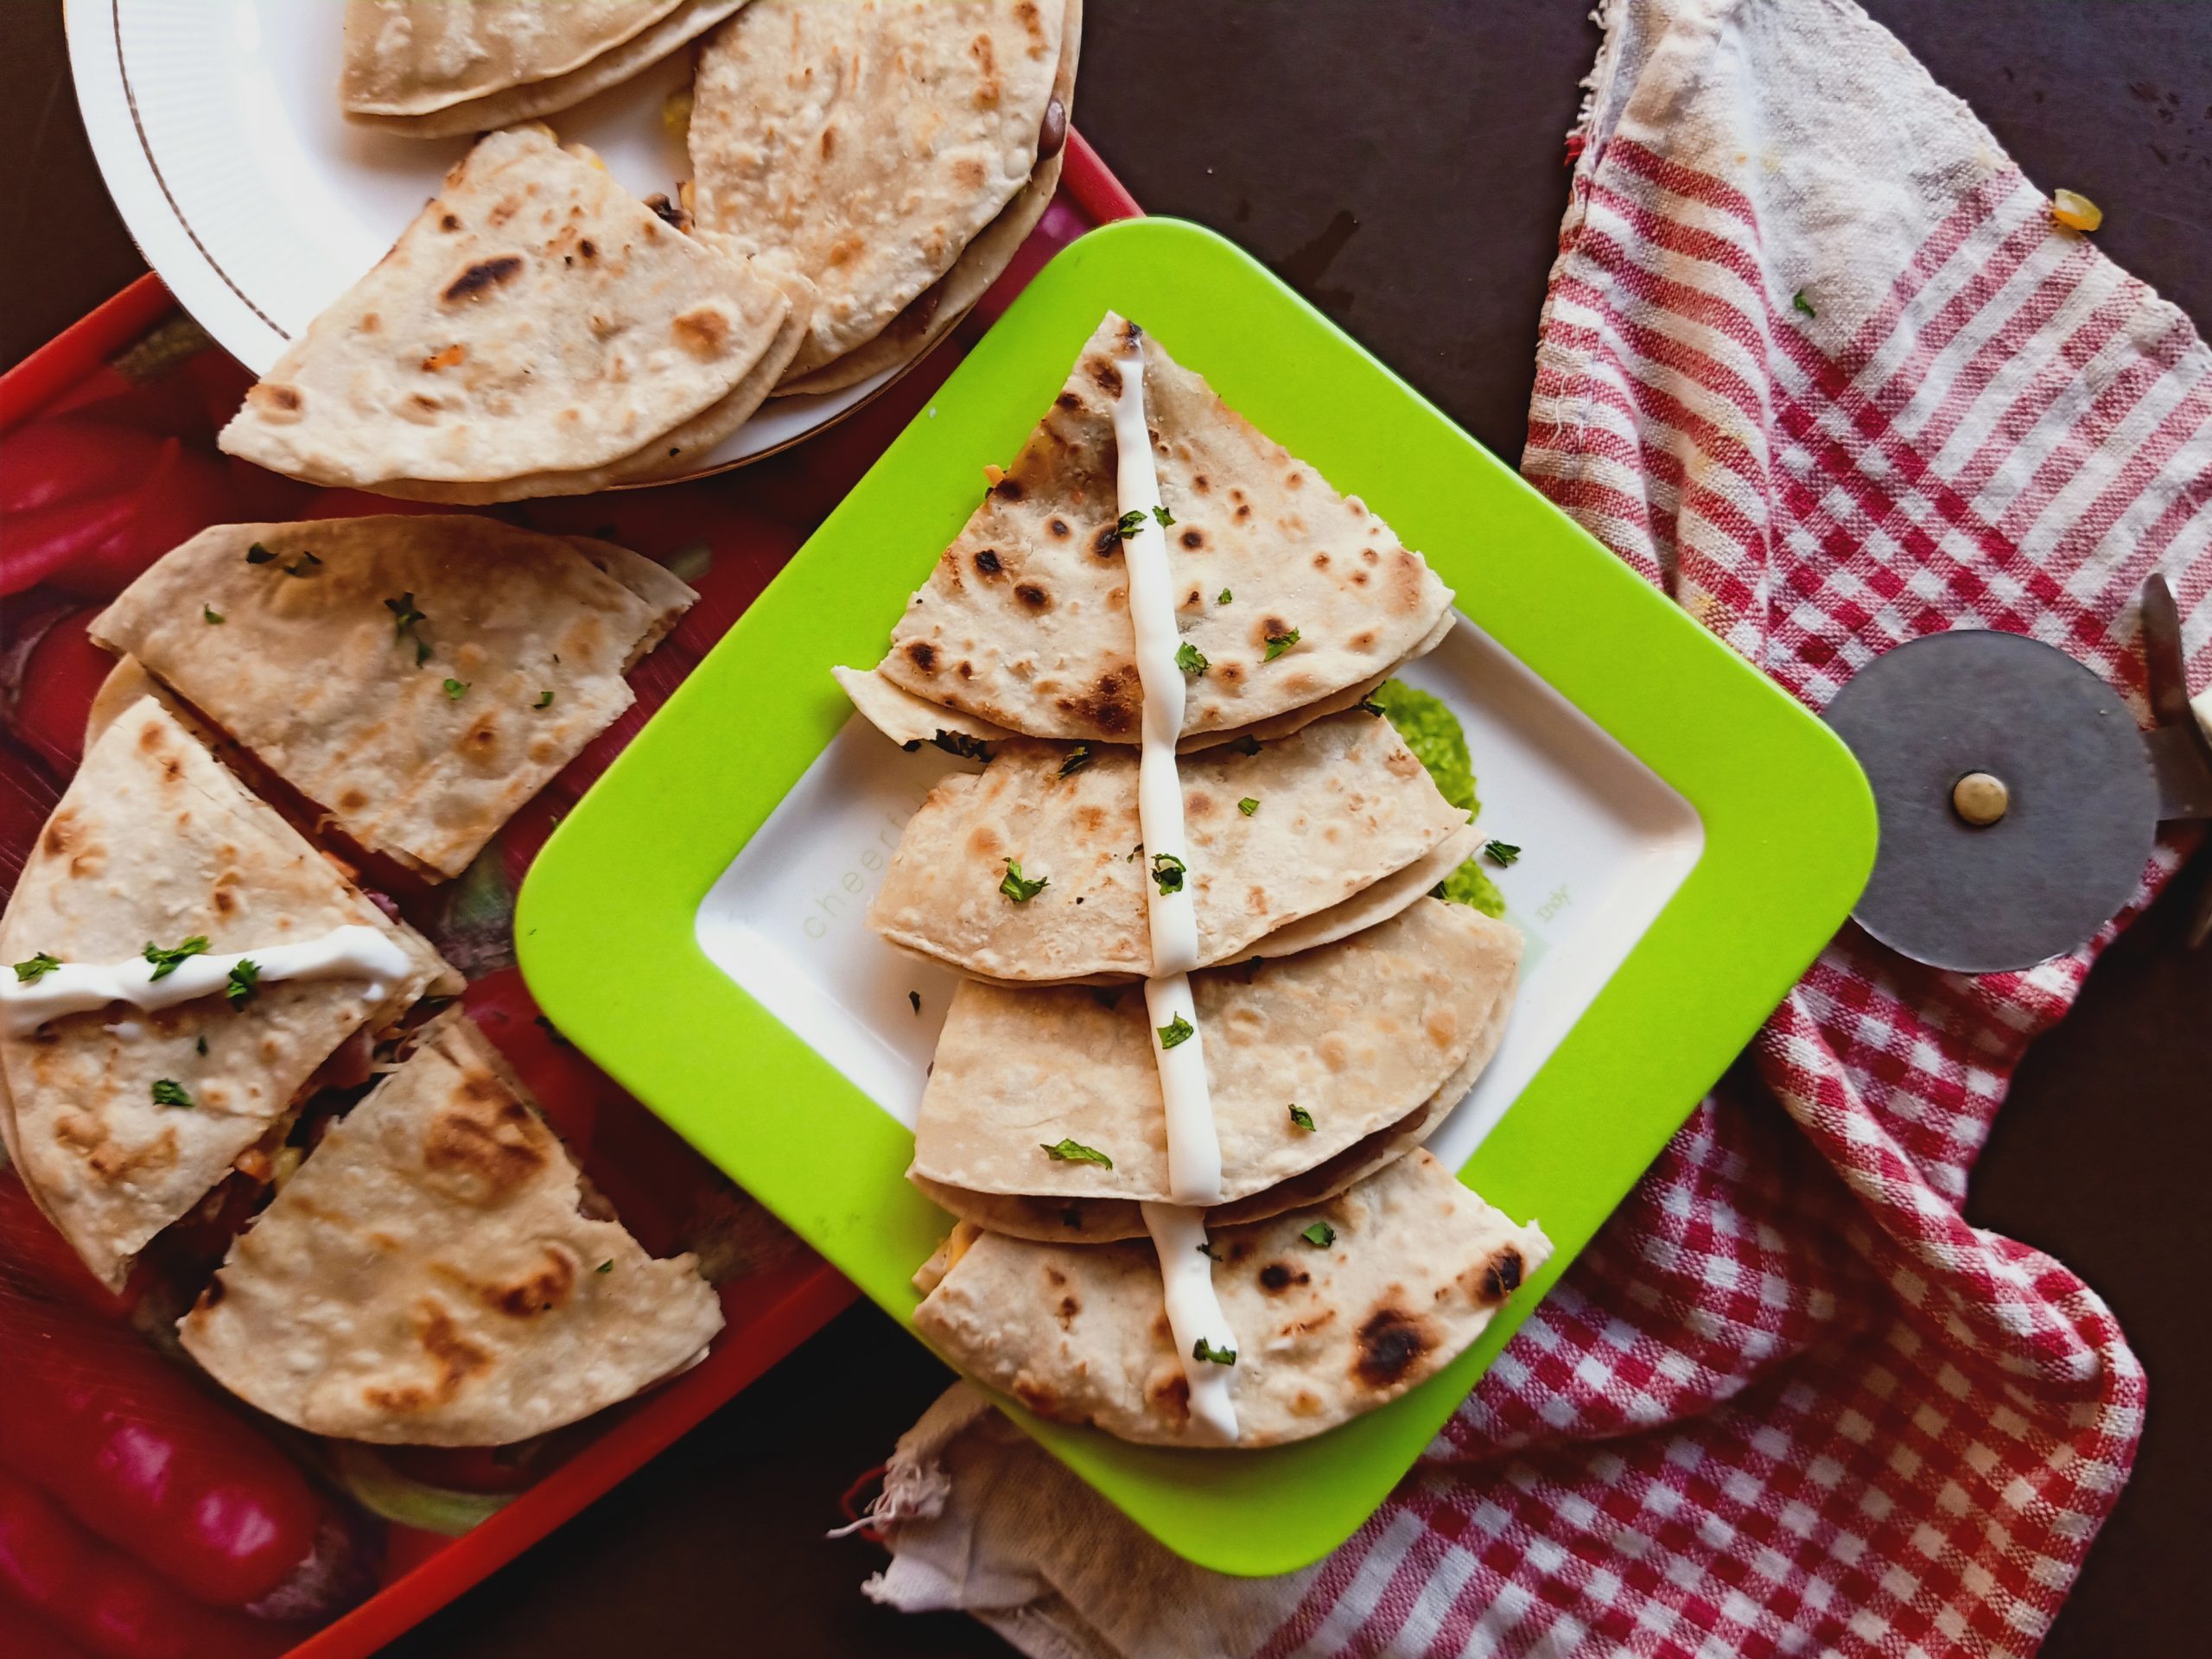 Top view of quesadillas on plate